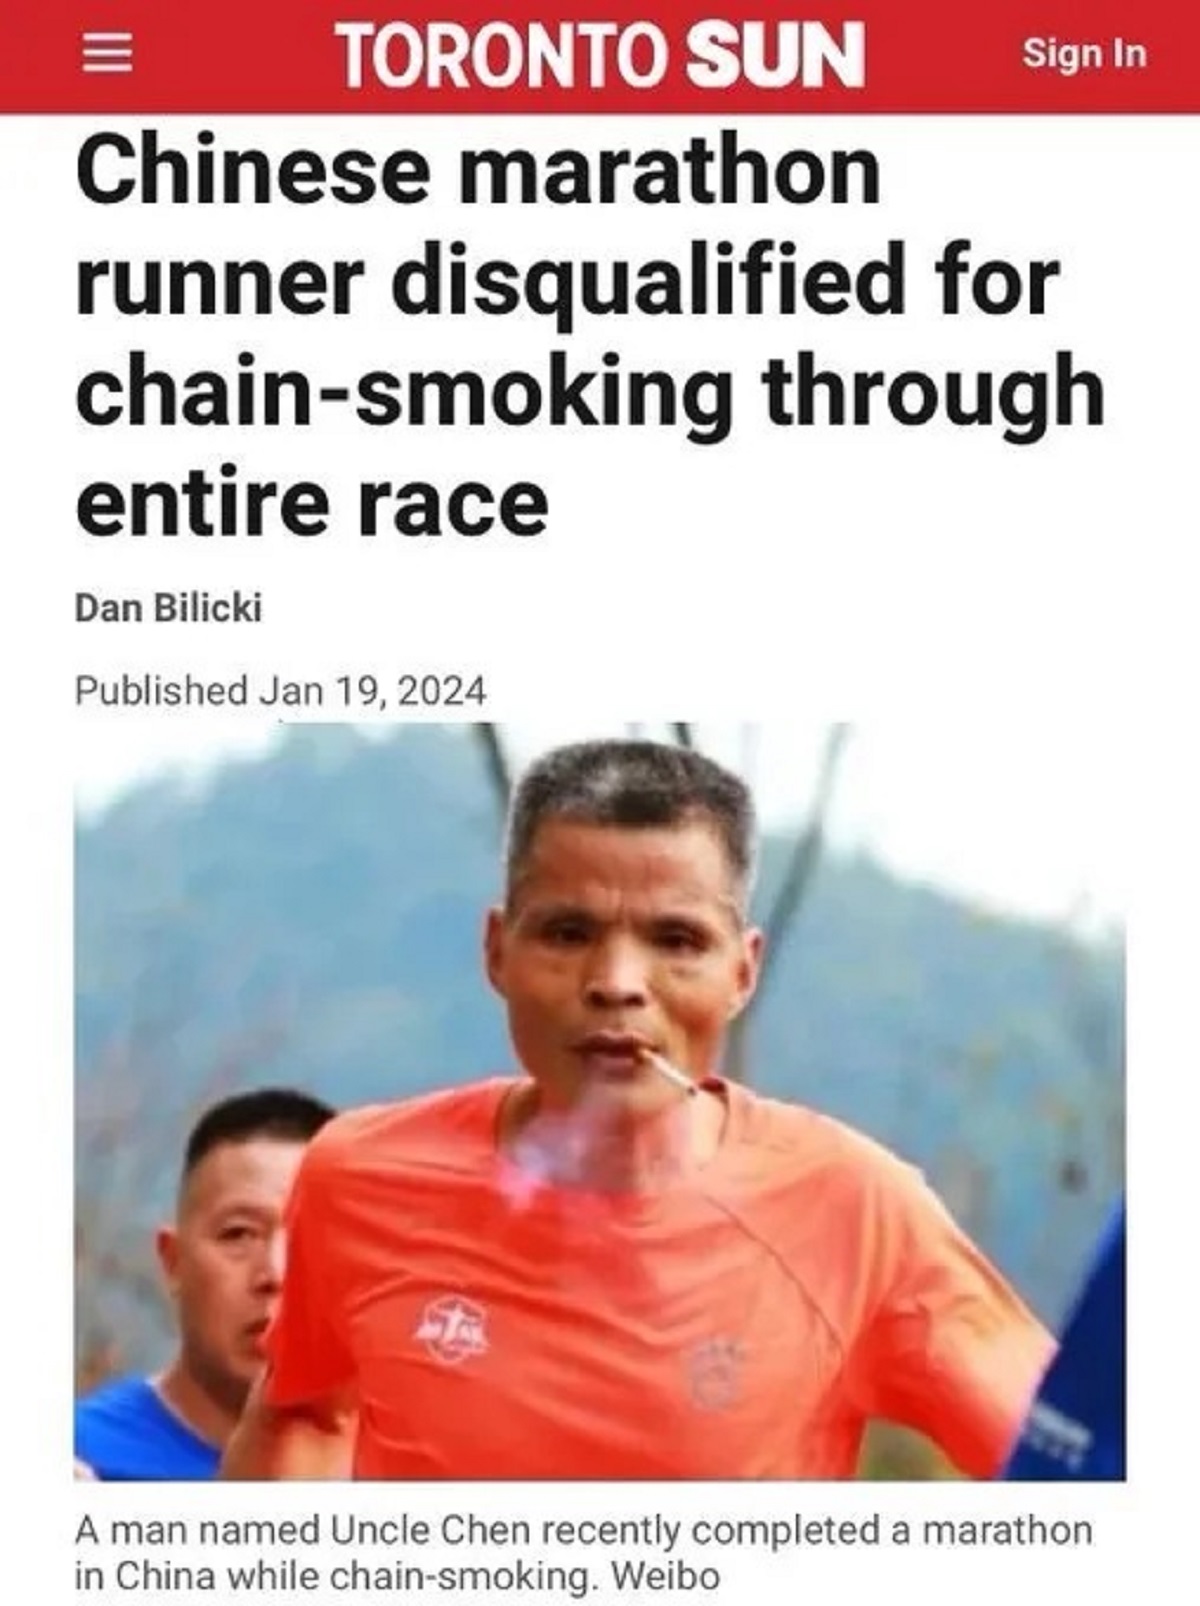 chinese man marathon smoking - Toronto Sun Chinese marathon runner disqualified for chainsmoking through entire race Dan Bilicki Published Sign In A man named Uncle Chen recently completed a marathon. in China while chainsmoking. Weibo